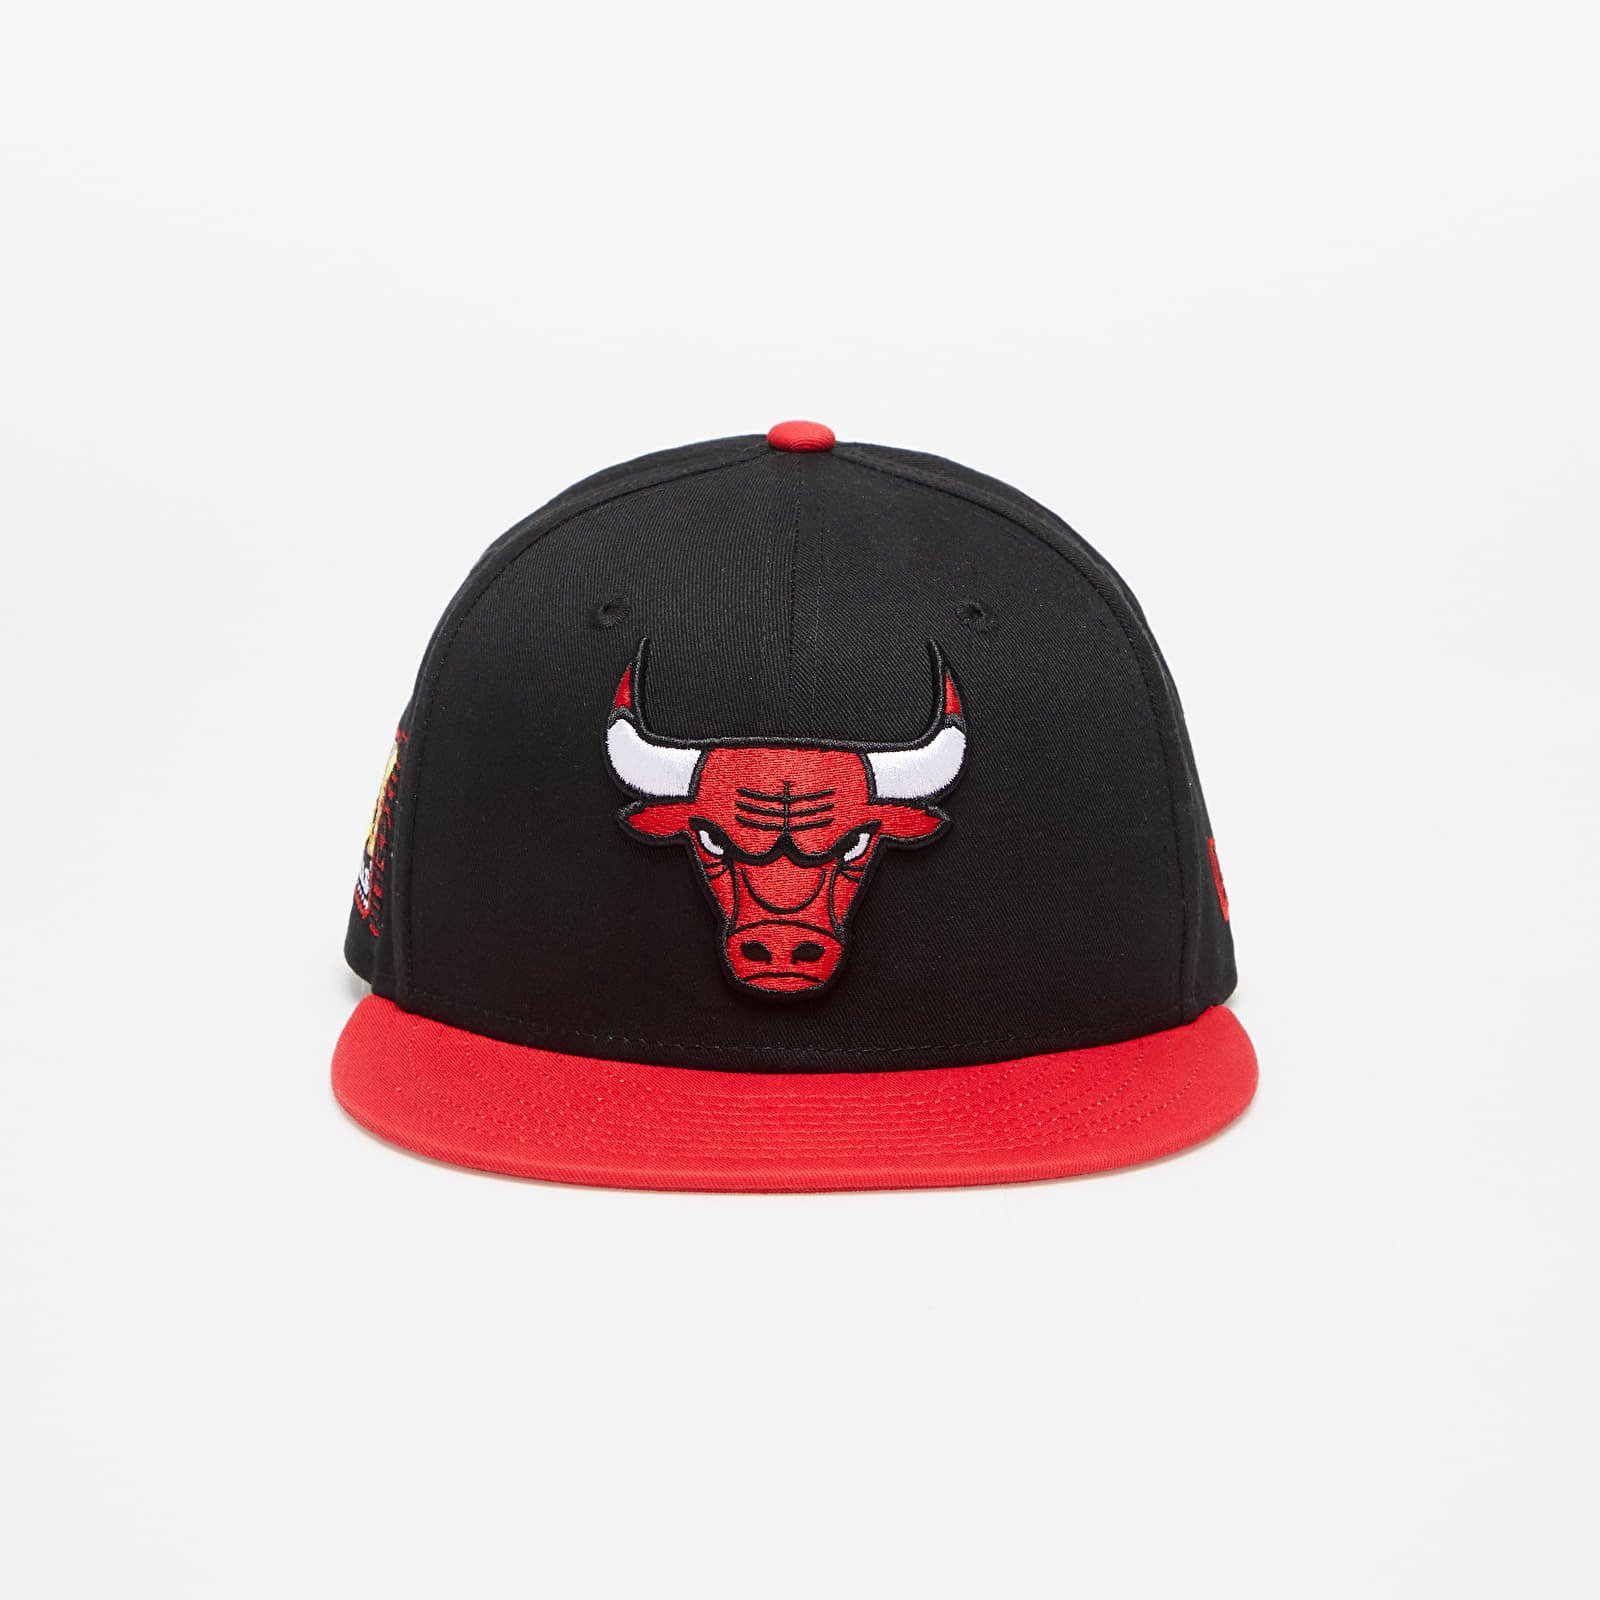 Chicago Bulls Team Patch 9FIFTY Snapback Cap